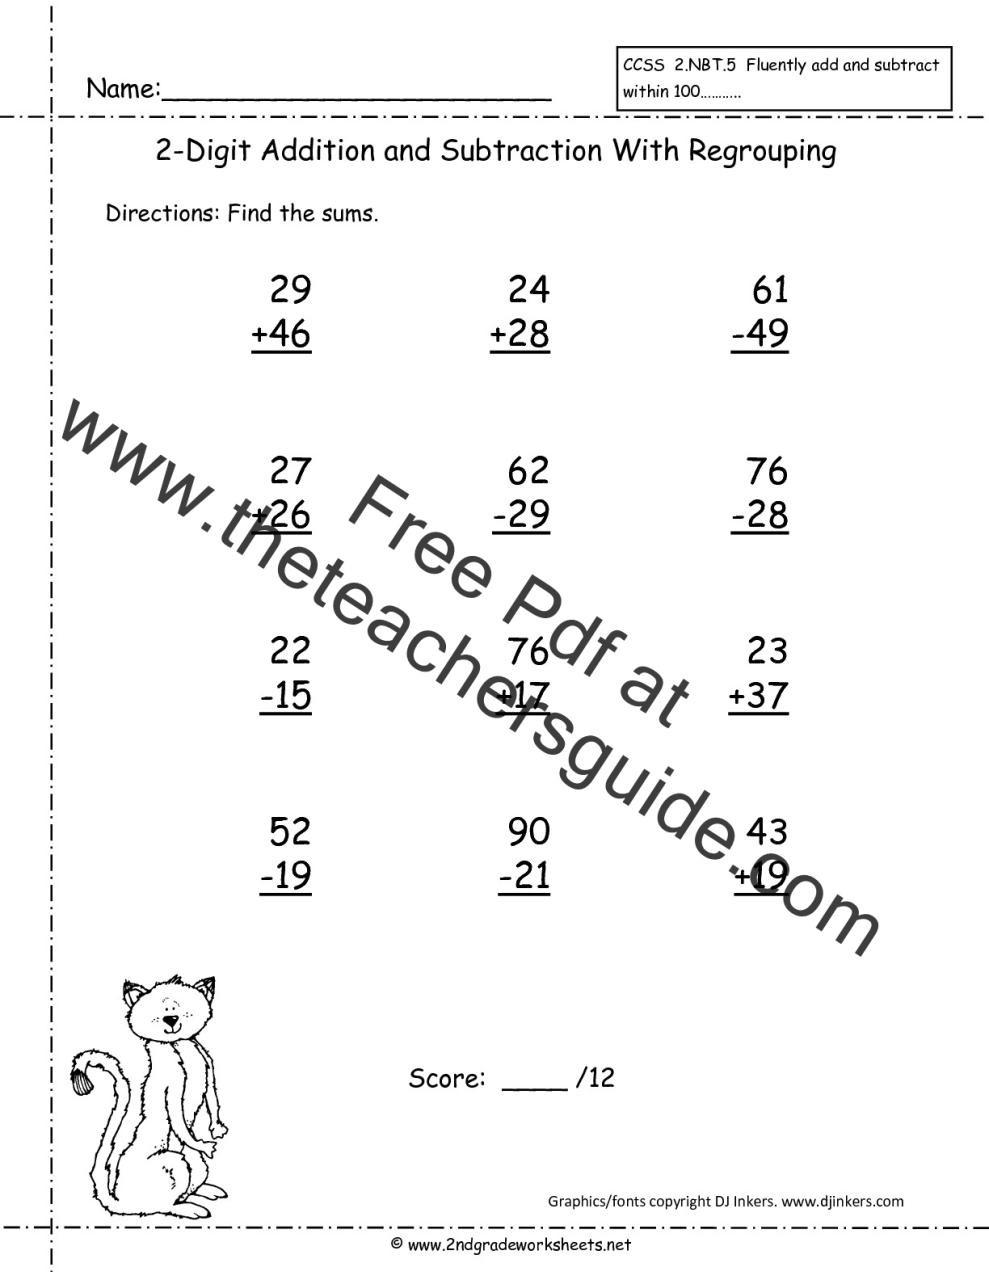 Two Digit Plus One Digit Addition Worksheets With Regrouping 2 digit